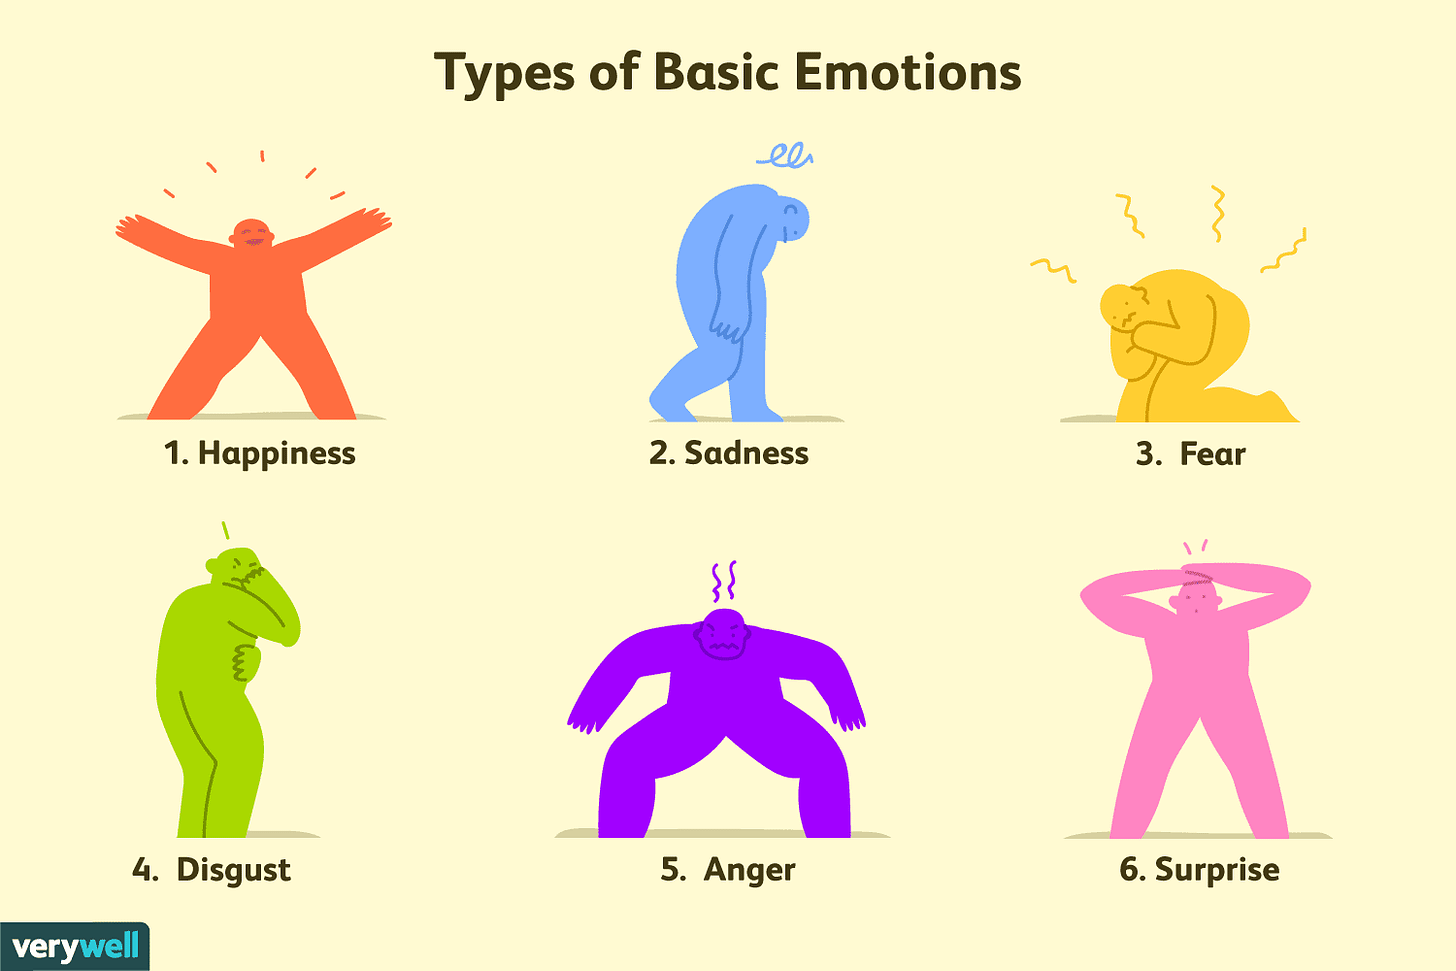 The six basic types of emotions